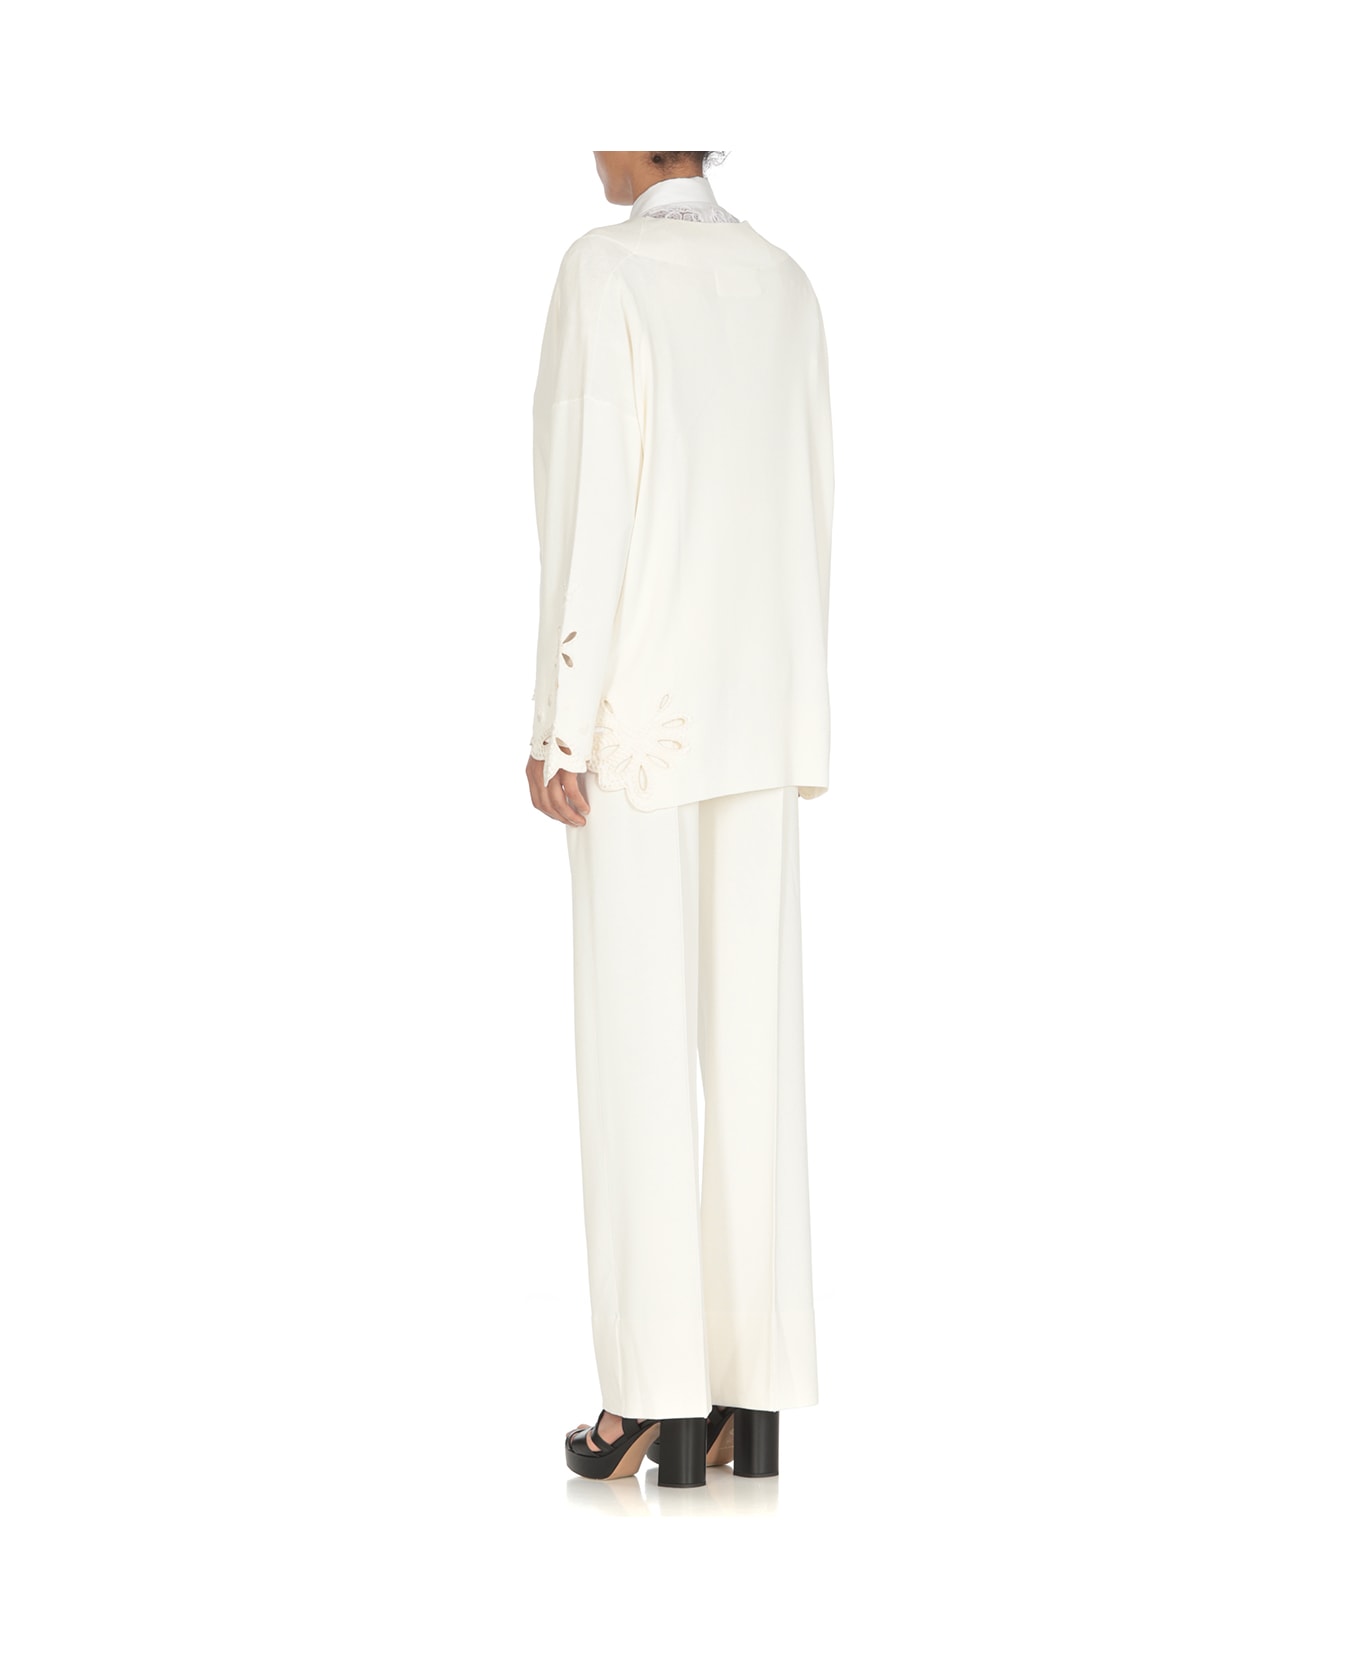 Ermanno Scervino Viscose Sweater With Embroideries - Ivory ニットウェア